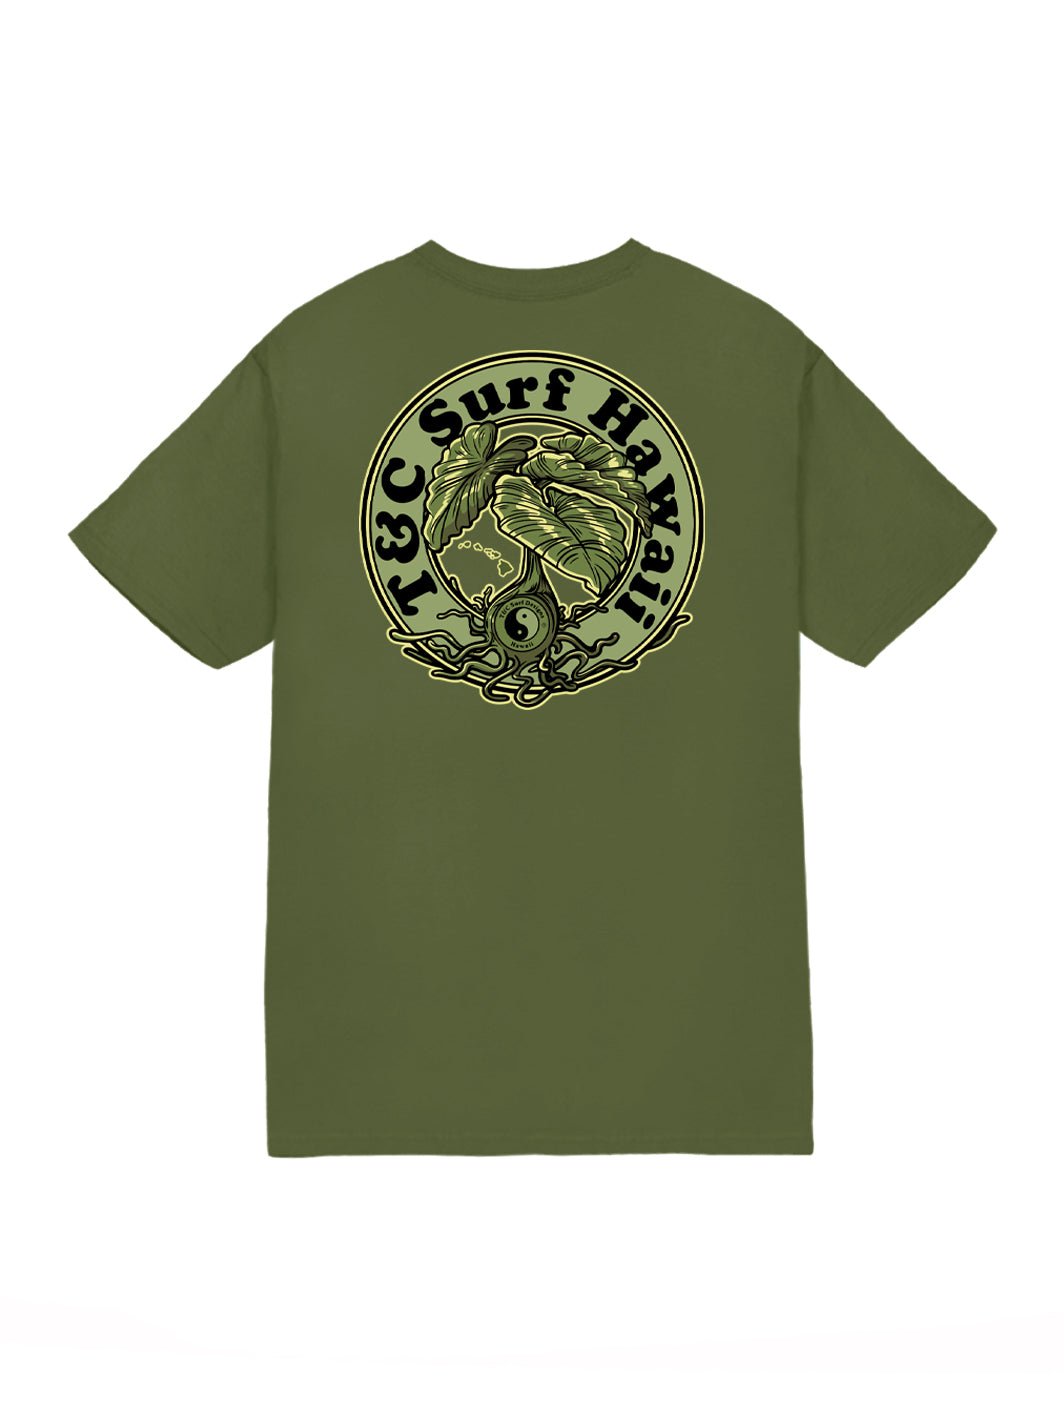 T&C Surf Designs T&C Surf Know Your Roots Jersey Tee, Military Green / S